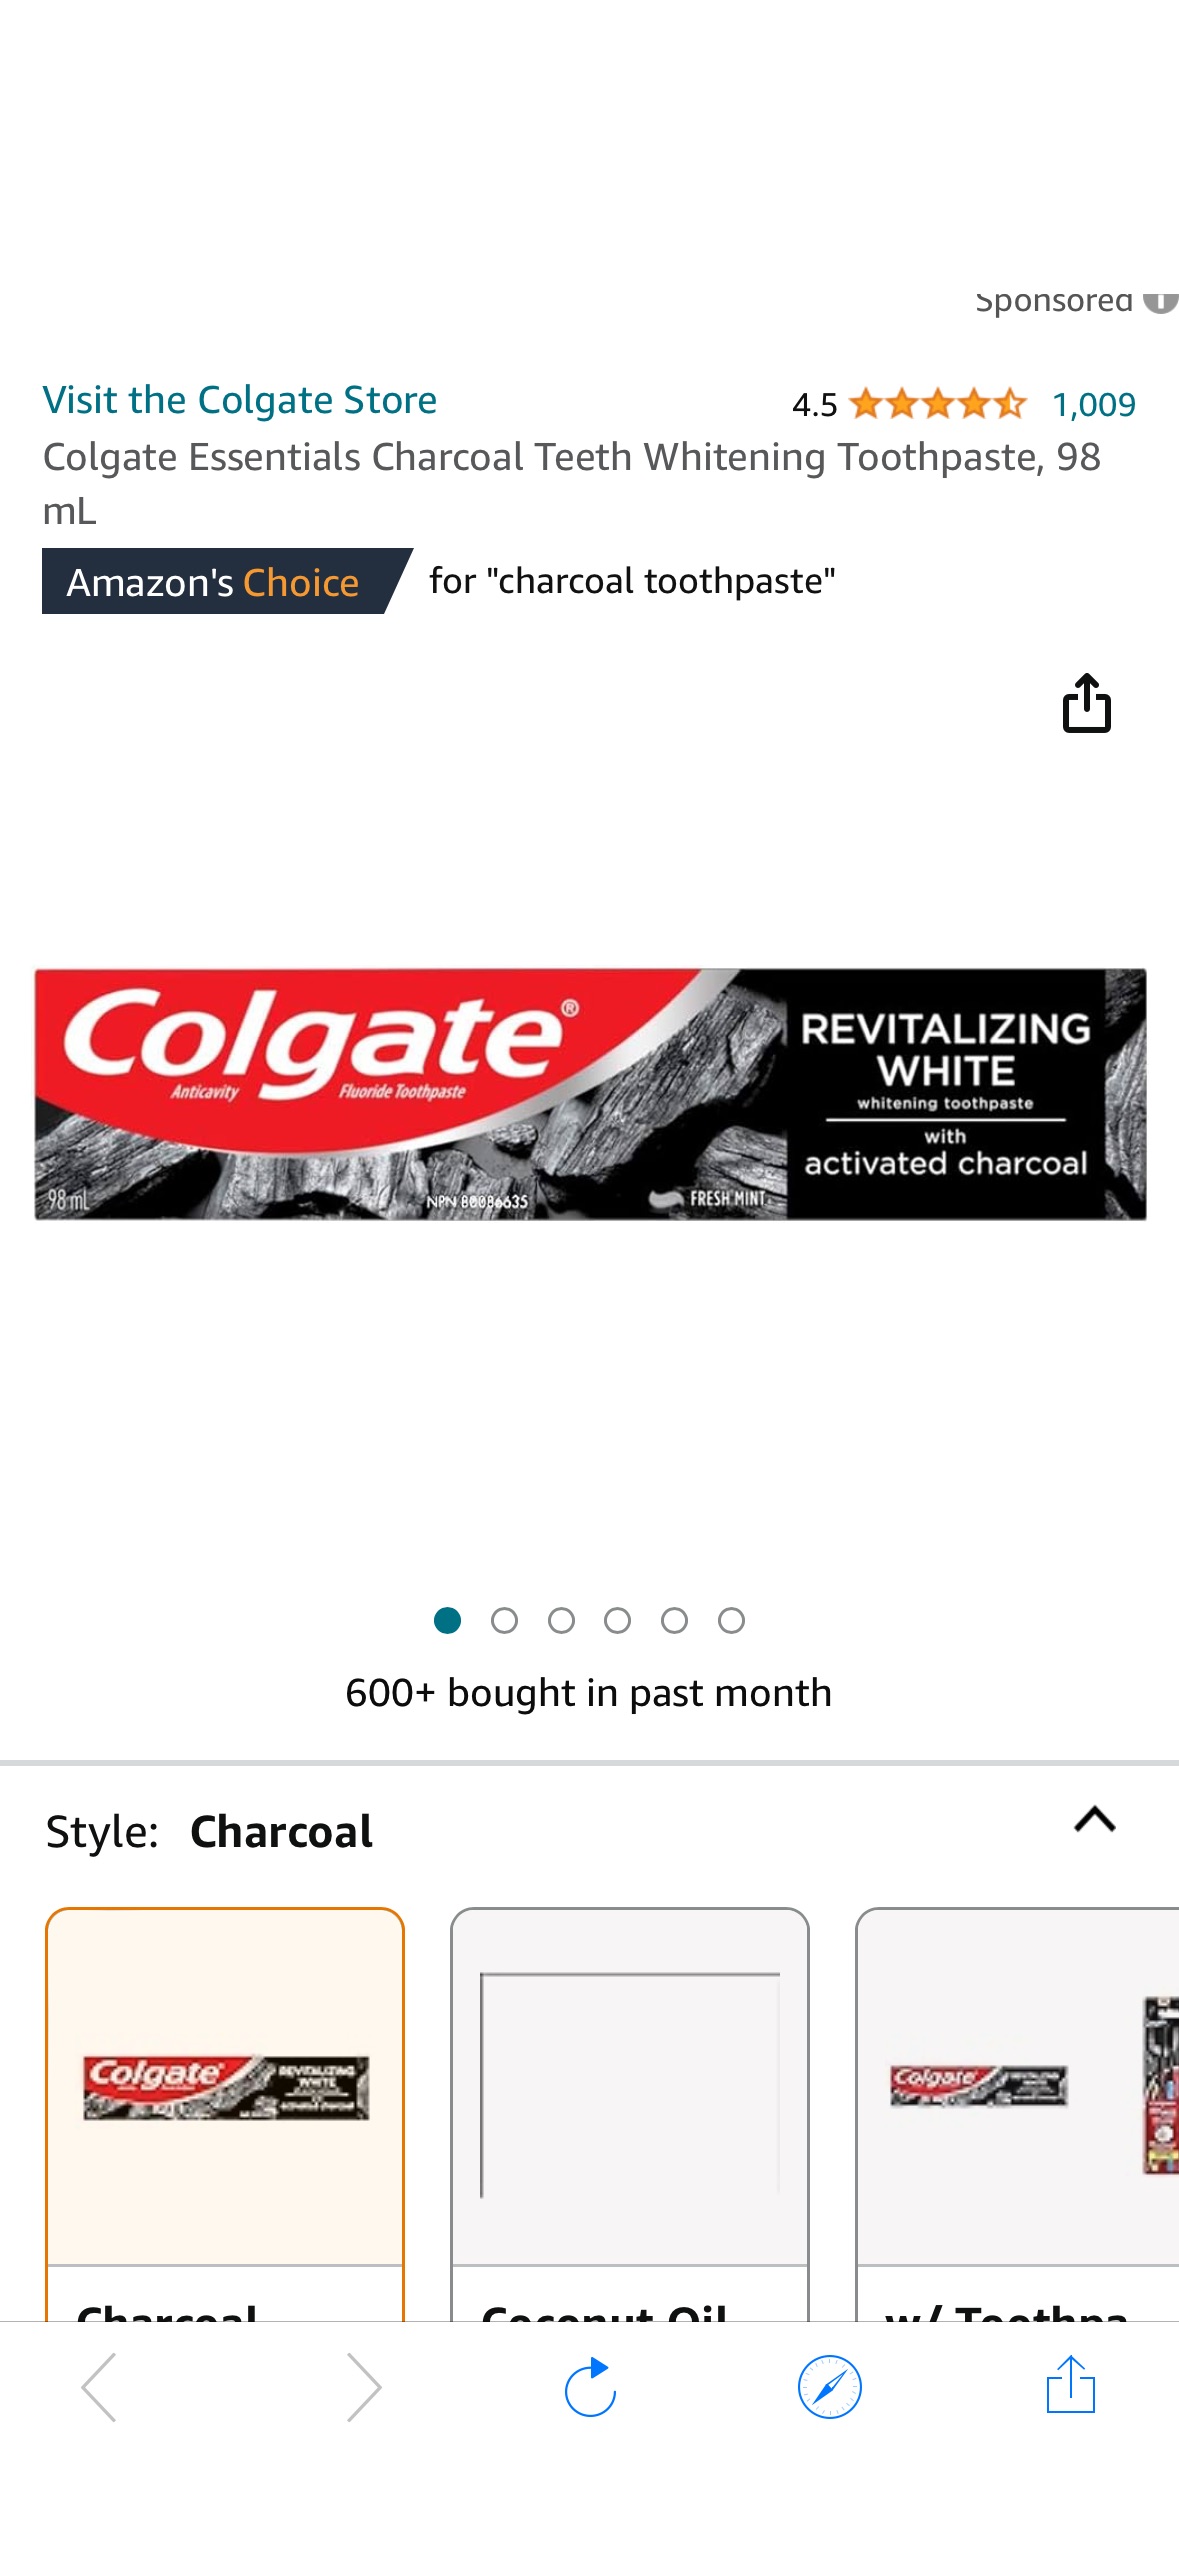 Colgate Essentials Charcoal Teeth Whitening Toothpaste, 98 mL : Amazon.ca: Health & Personal Care